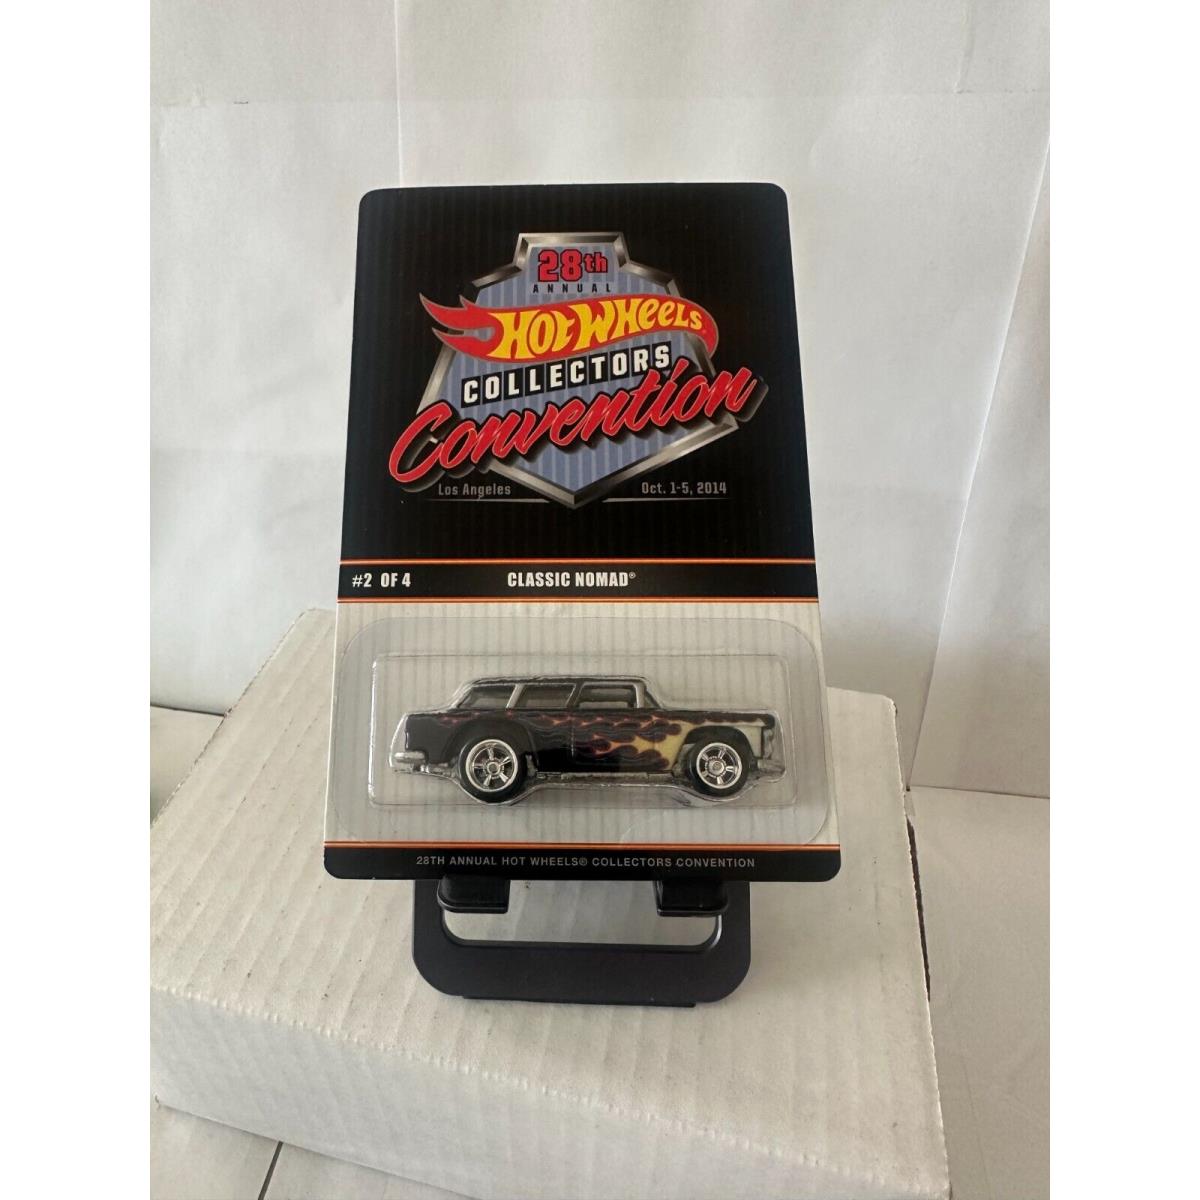 Hot Wheels 28th Annual Convention Classic Nomad 2/4 V17